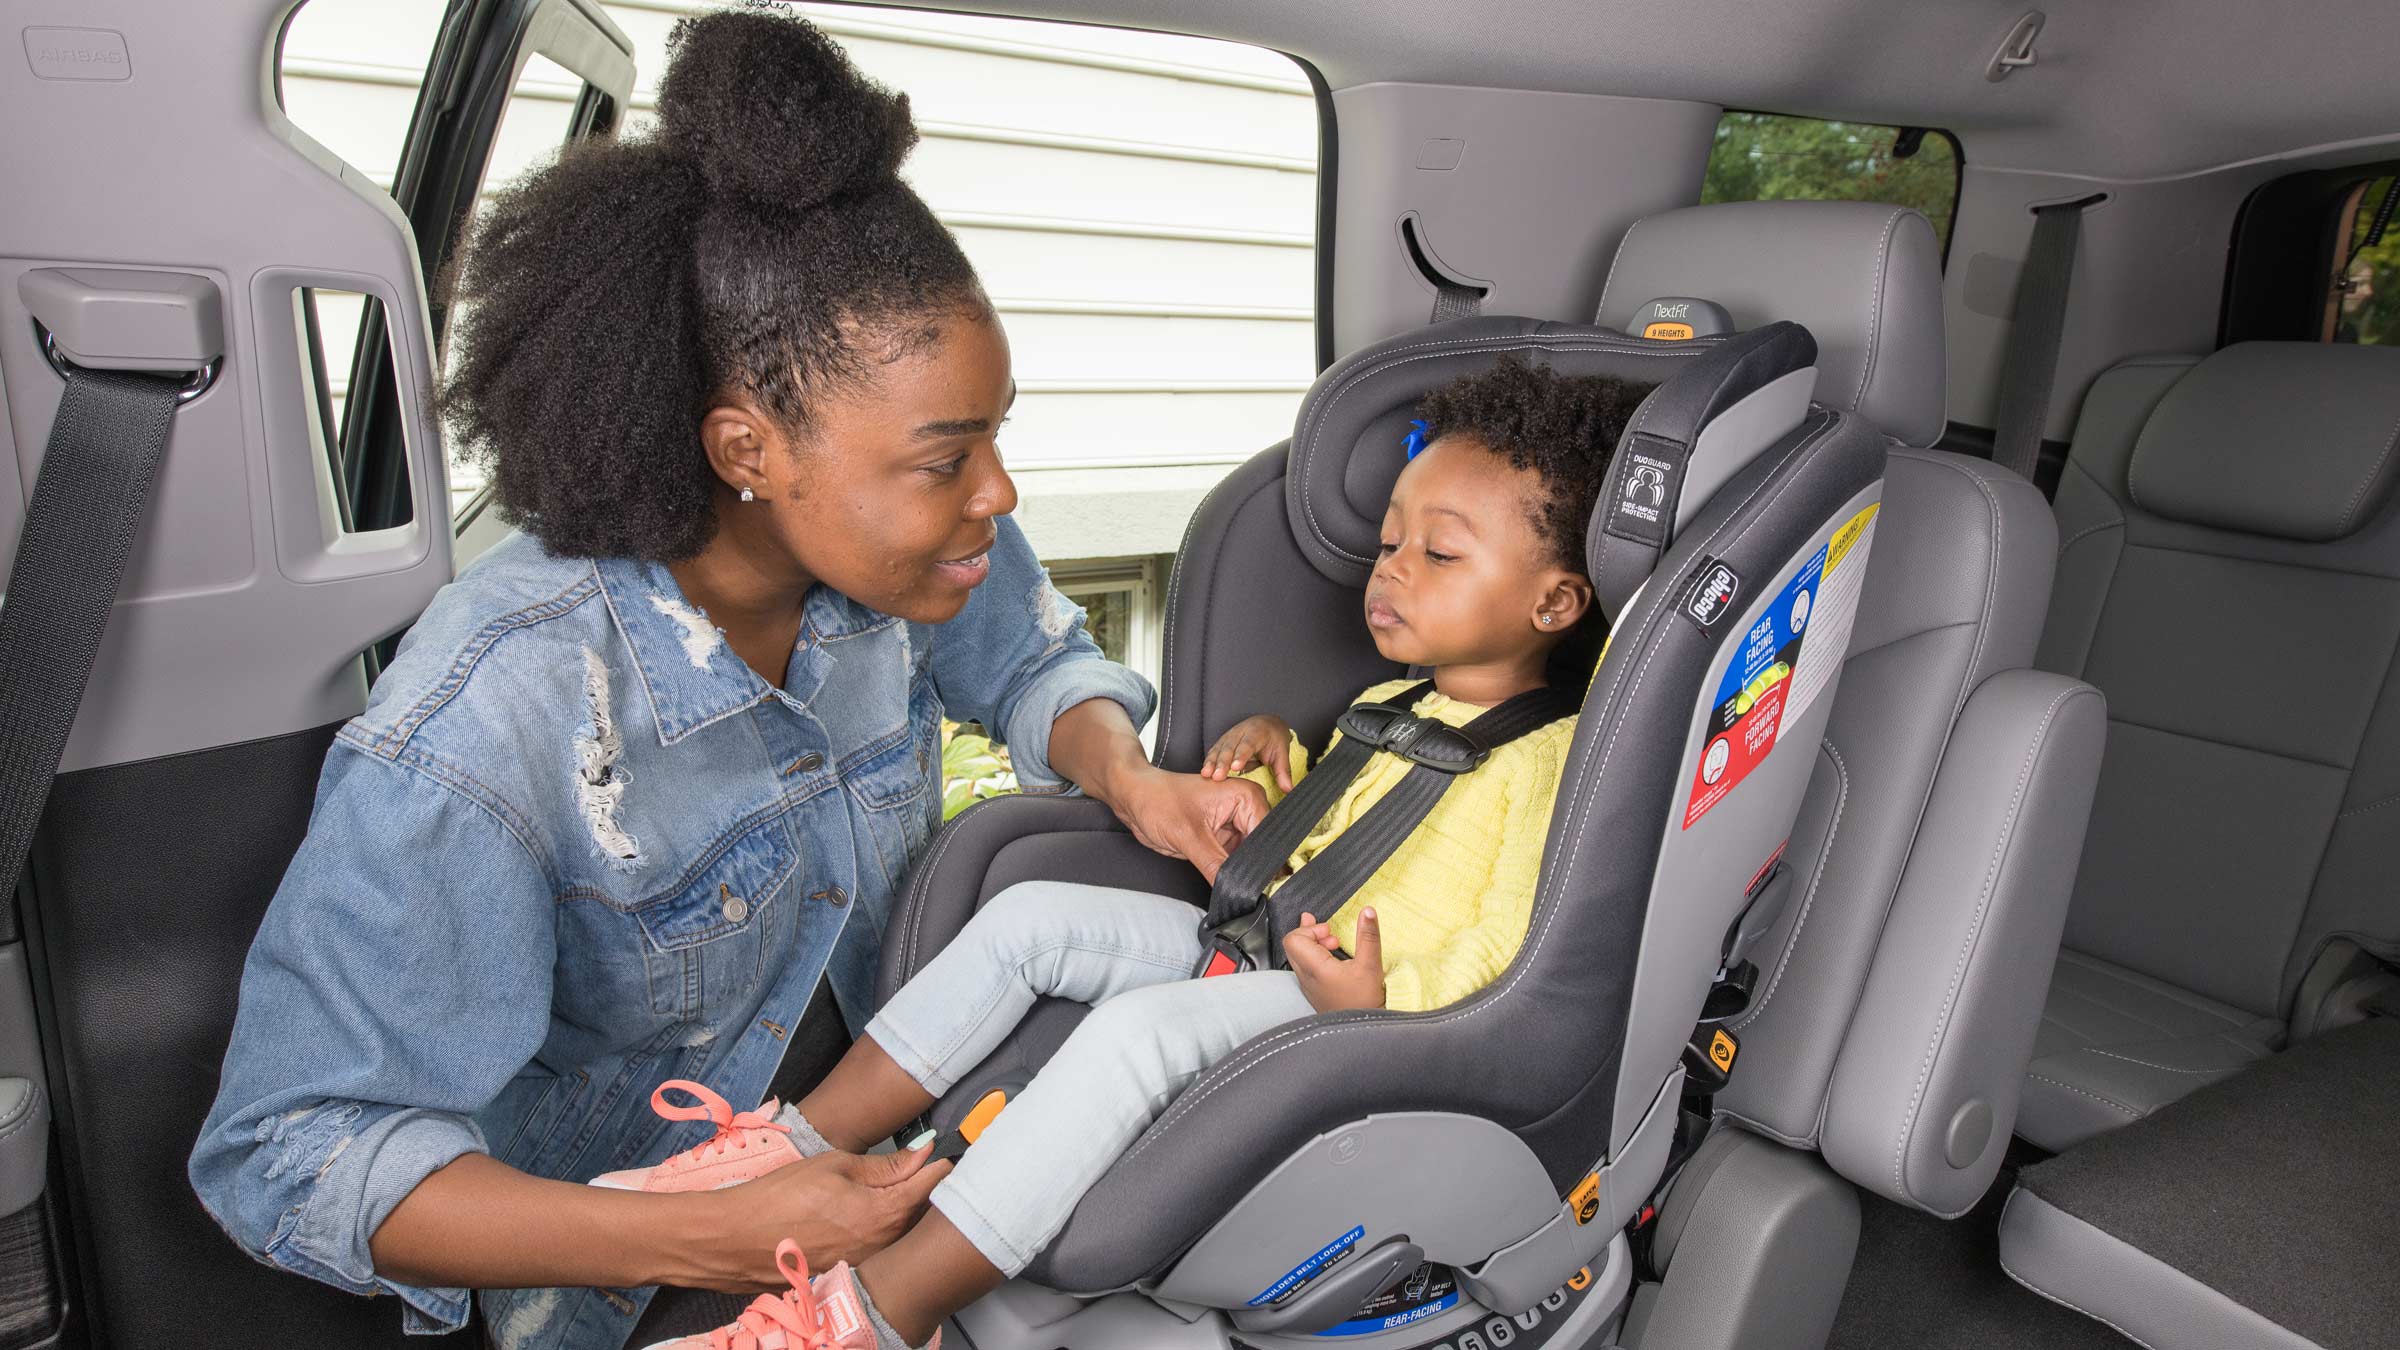 Woman with toddler in a car seat